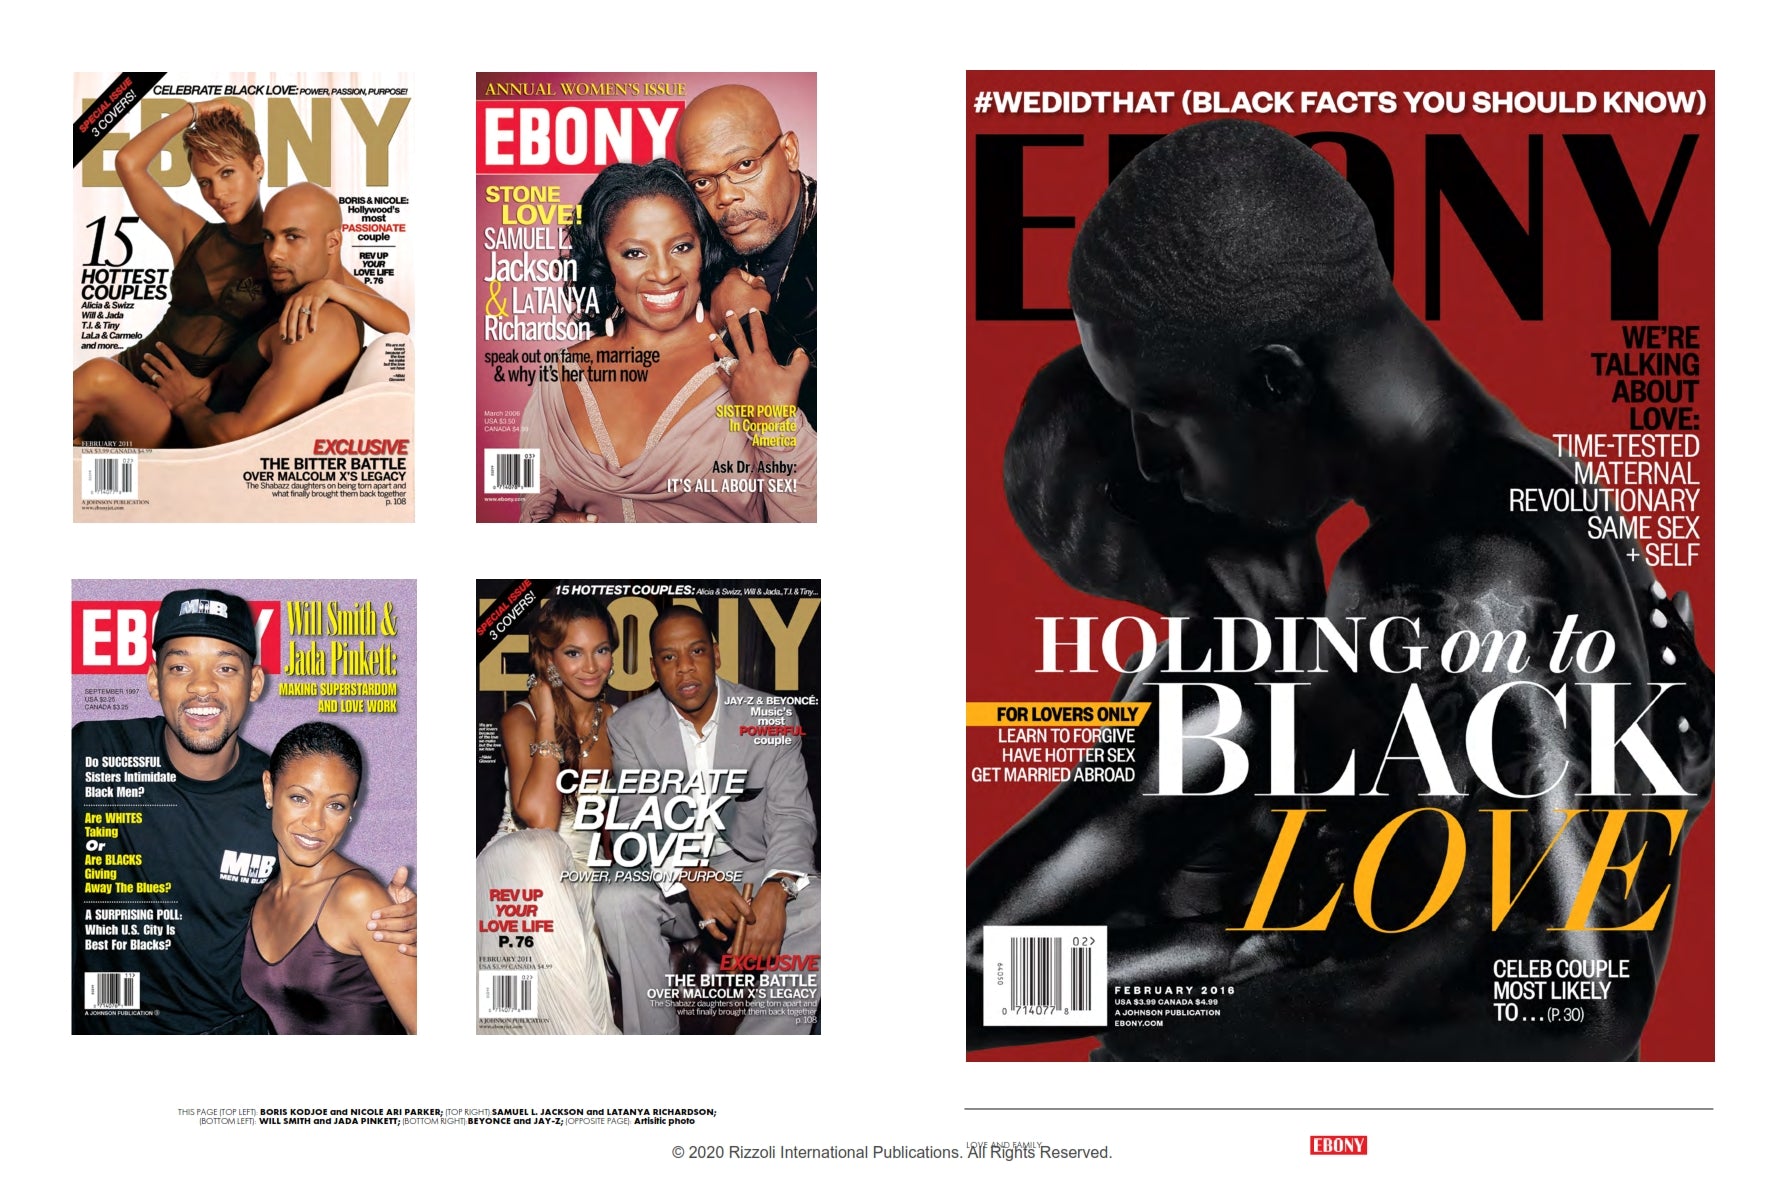 Ebony: Covering the First 75 Years